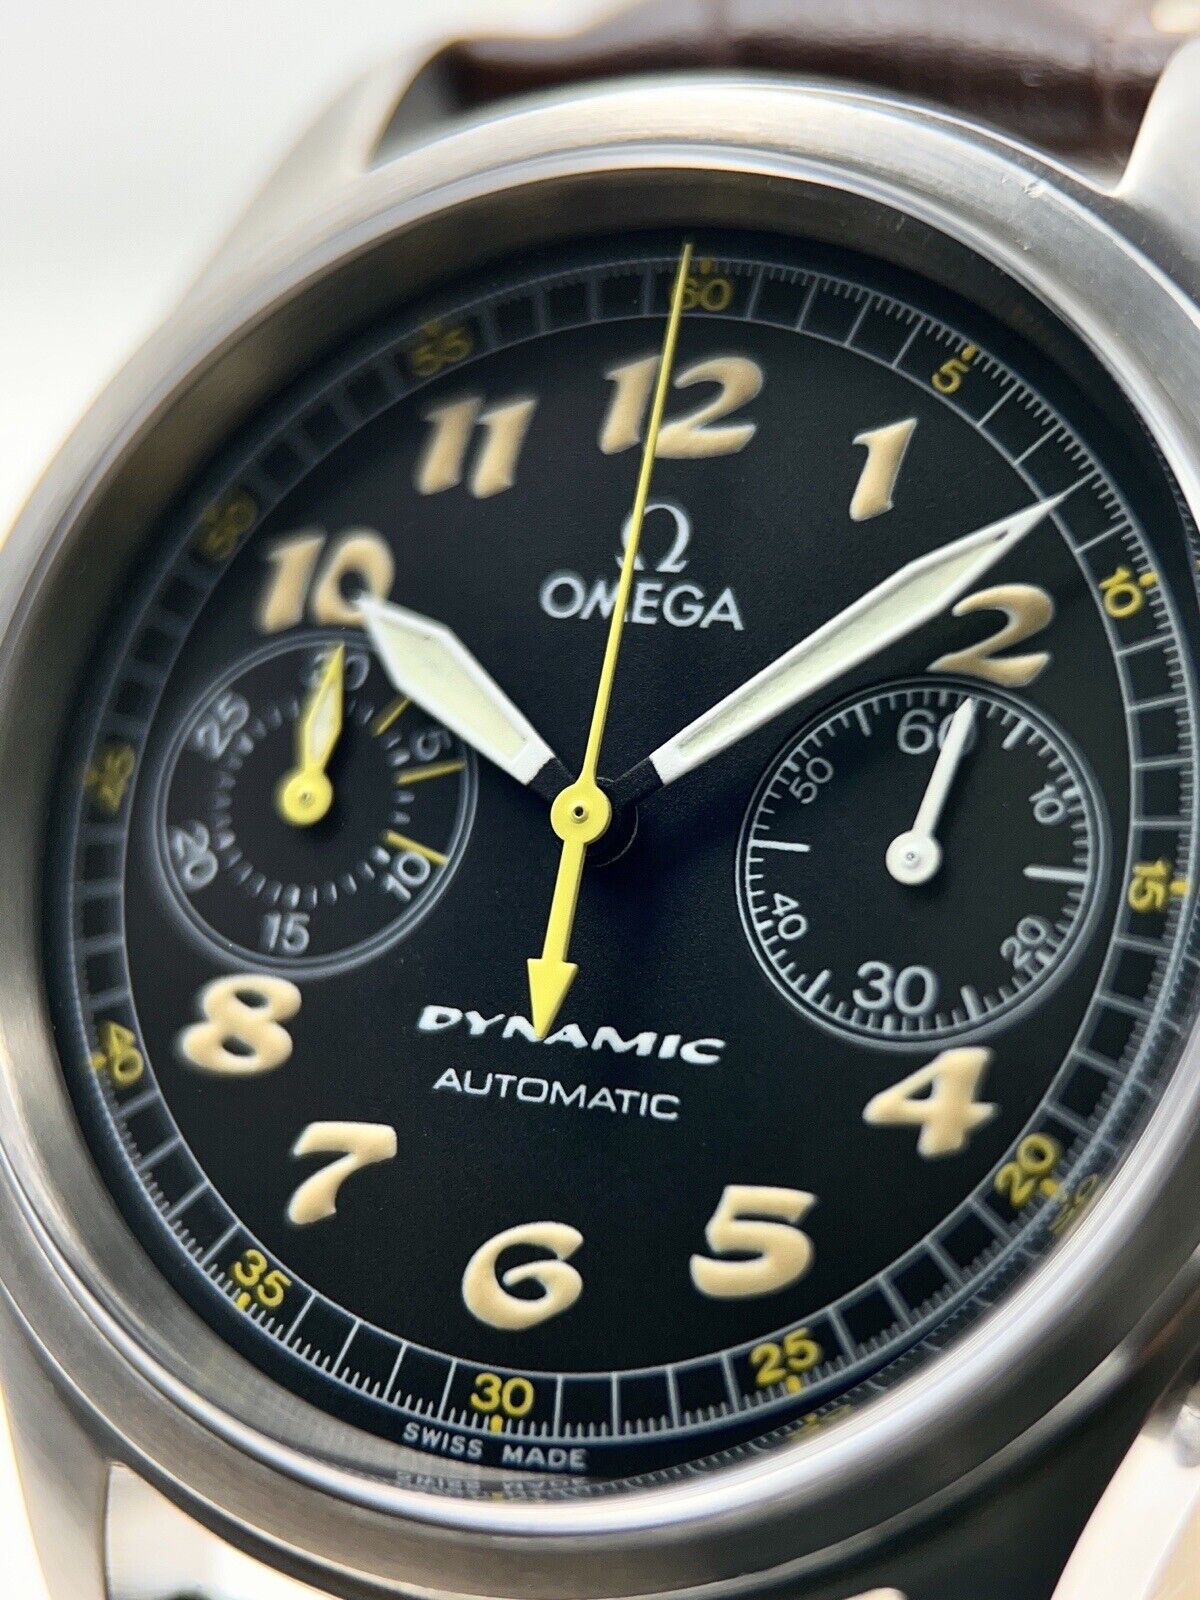 OMEGA Dynamic 5240.50 Chronograph Black Dial Automatic Men's Steel Watch